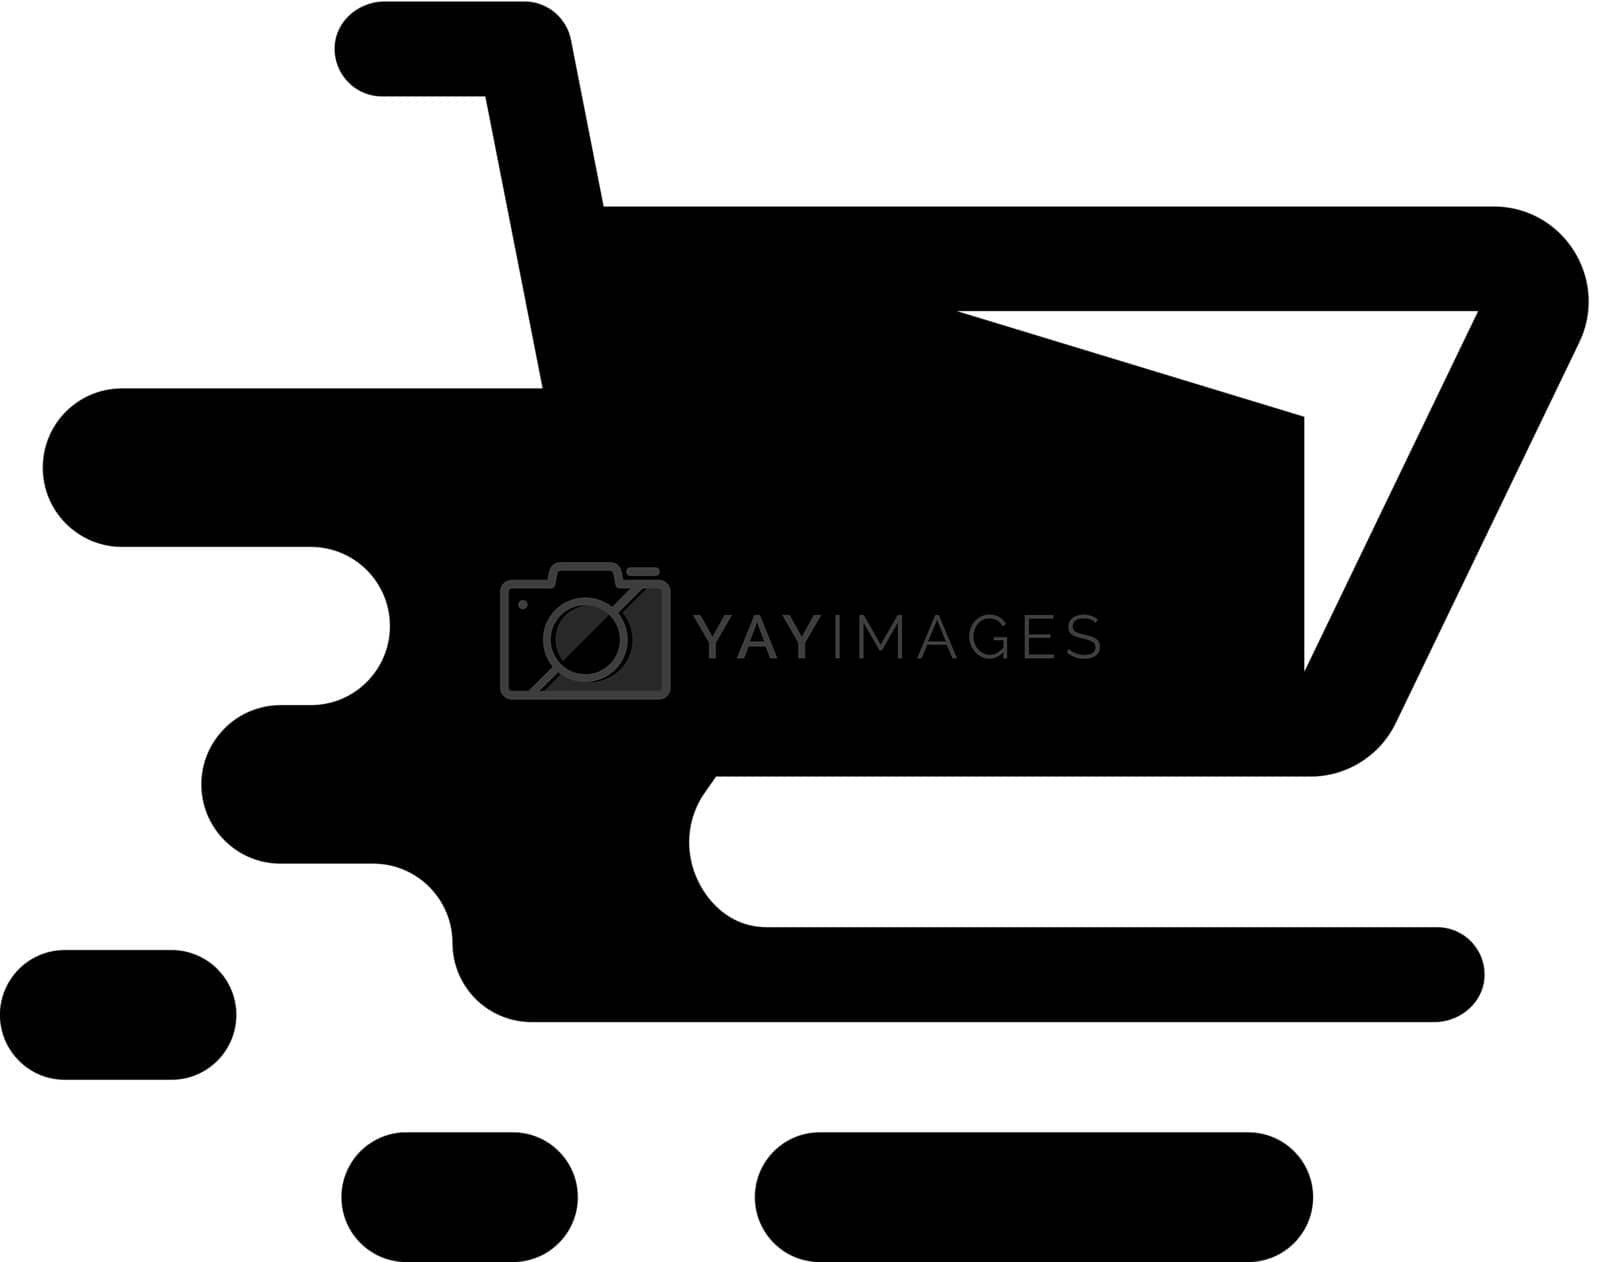 Royalty free image of Fast shopping icon by delwar018